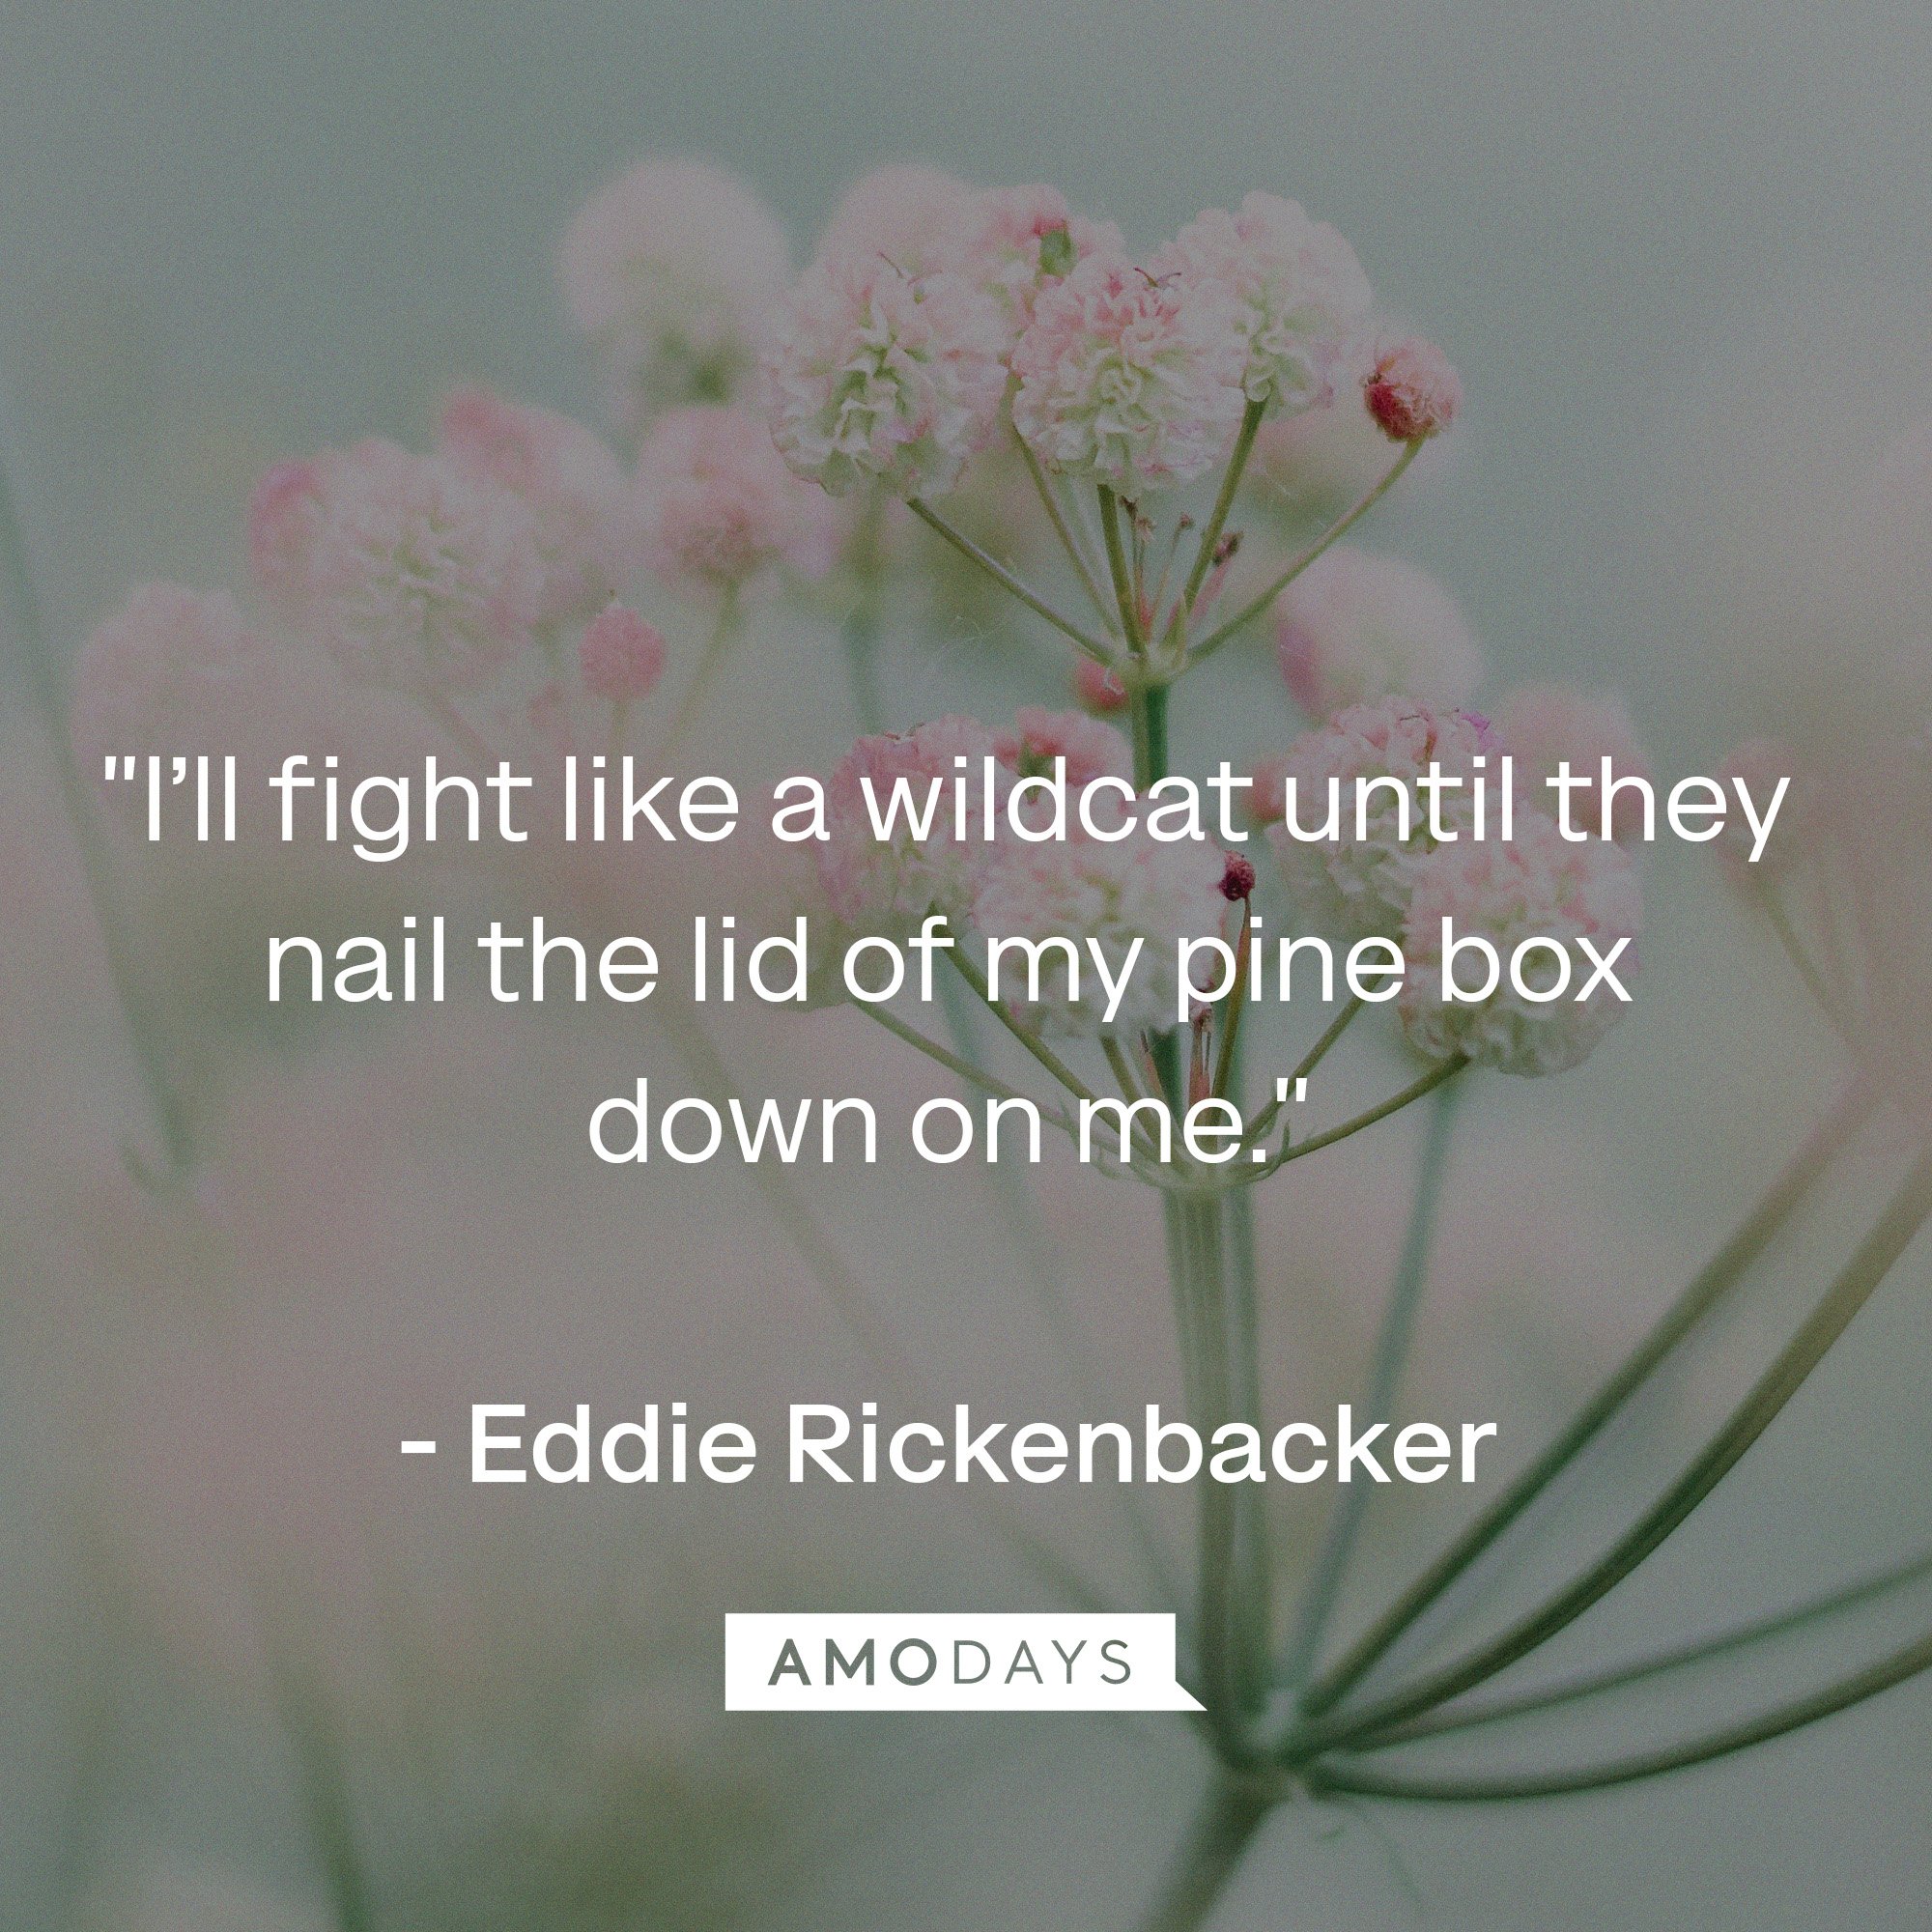 Eddie Rickenbacker's quote: "I'll fight like a wildcat until they nail the lid of my pine box down on me."  | Image: AmoDays